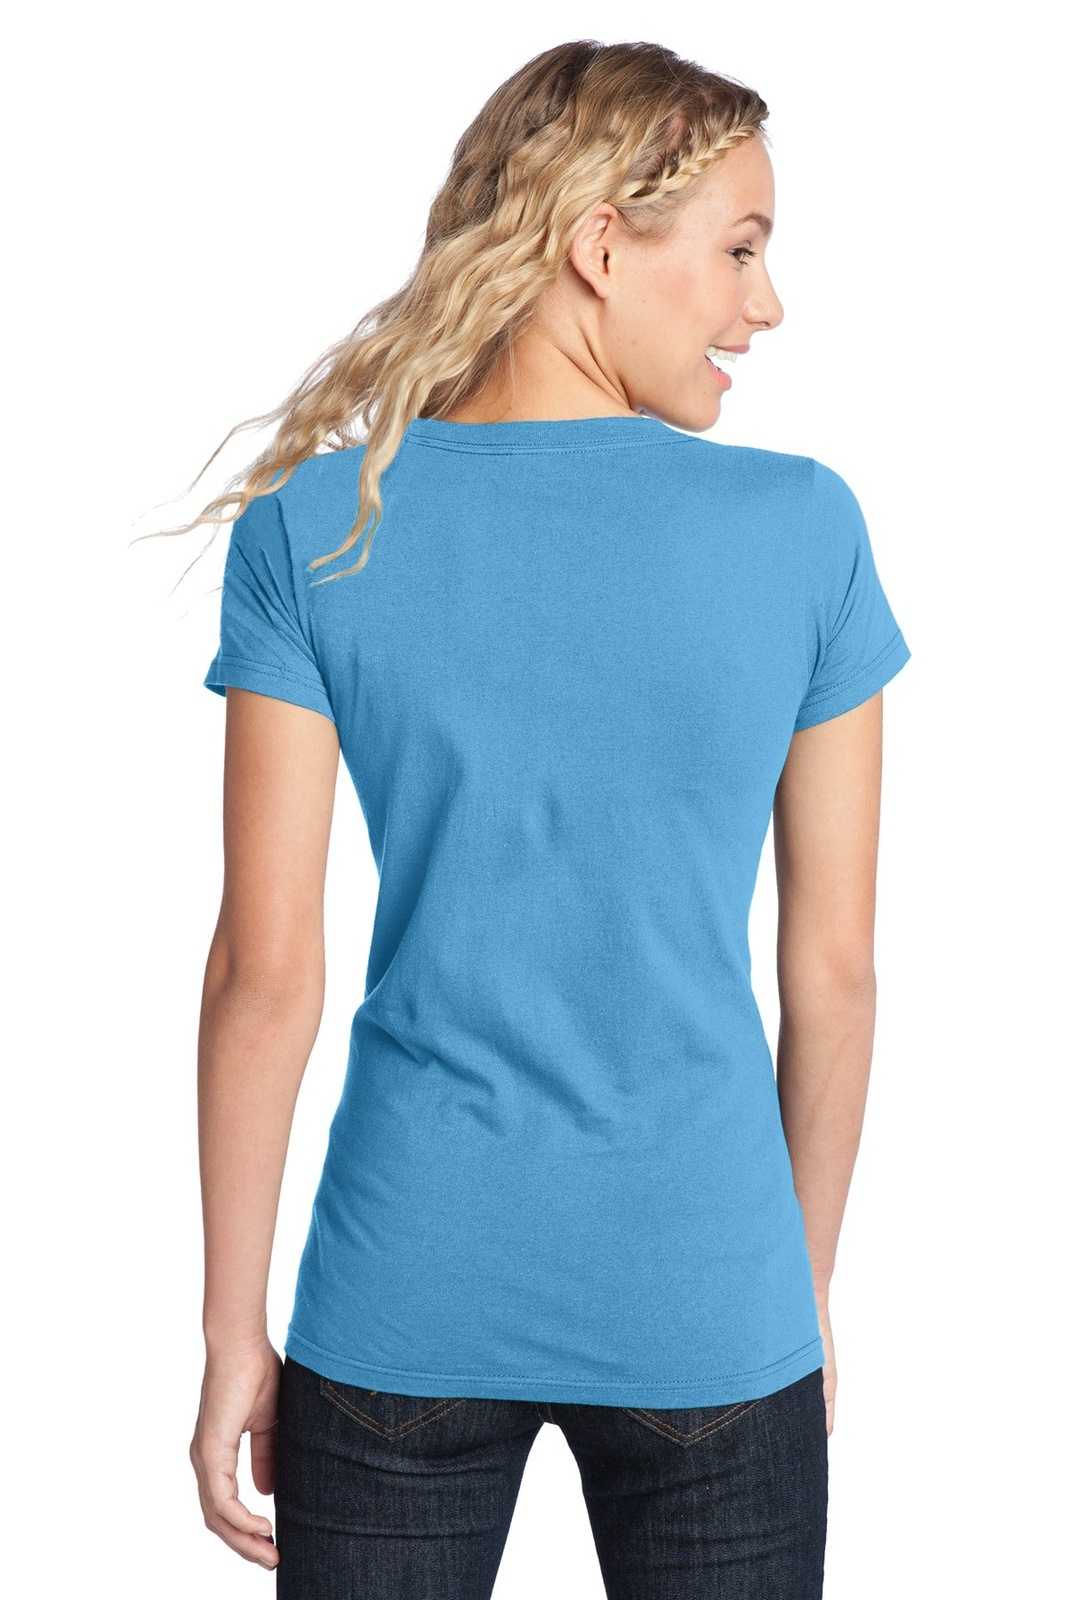 District DT5001 Women's Fitted The Concert Tee - Aquatic Blue - HIT a Double - 1